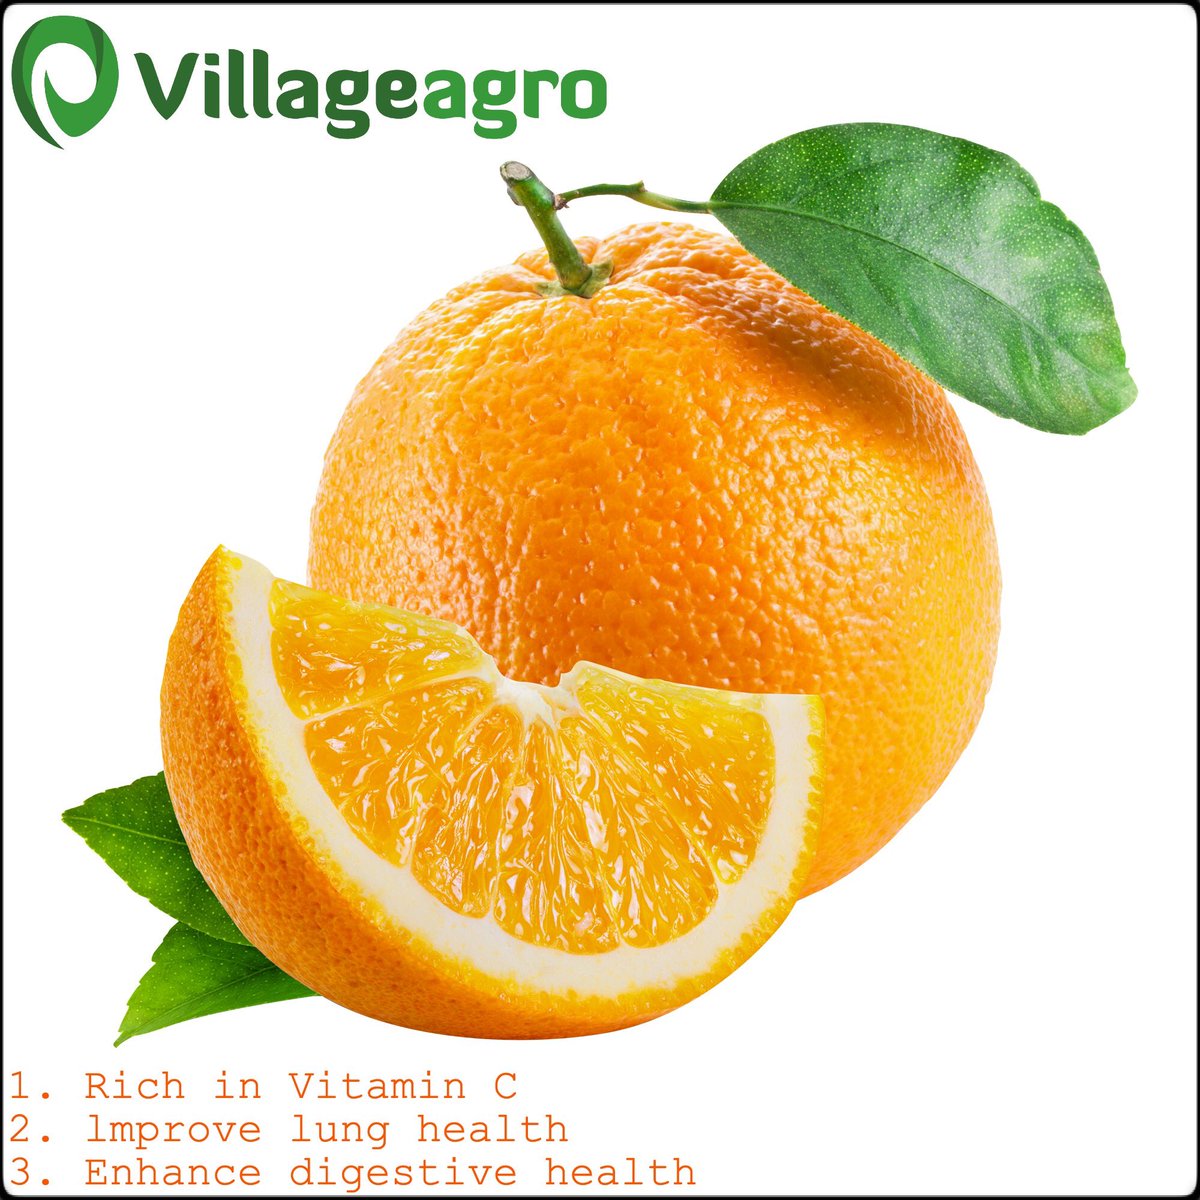 COVID-19 lockdown immunity boosting food - Orange

#villageagrodotcom #villageagro #agritech #startup #agriculture #farmers #b2b #f2b #covid19 #immunity #agriproducts #polutryproducts #dairyproducts #vegetables #fruits #supllychain #organic #farm2business #india #business #orange